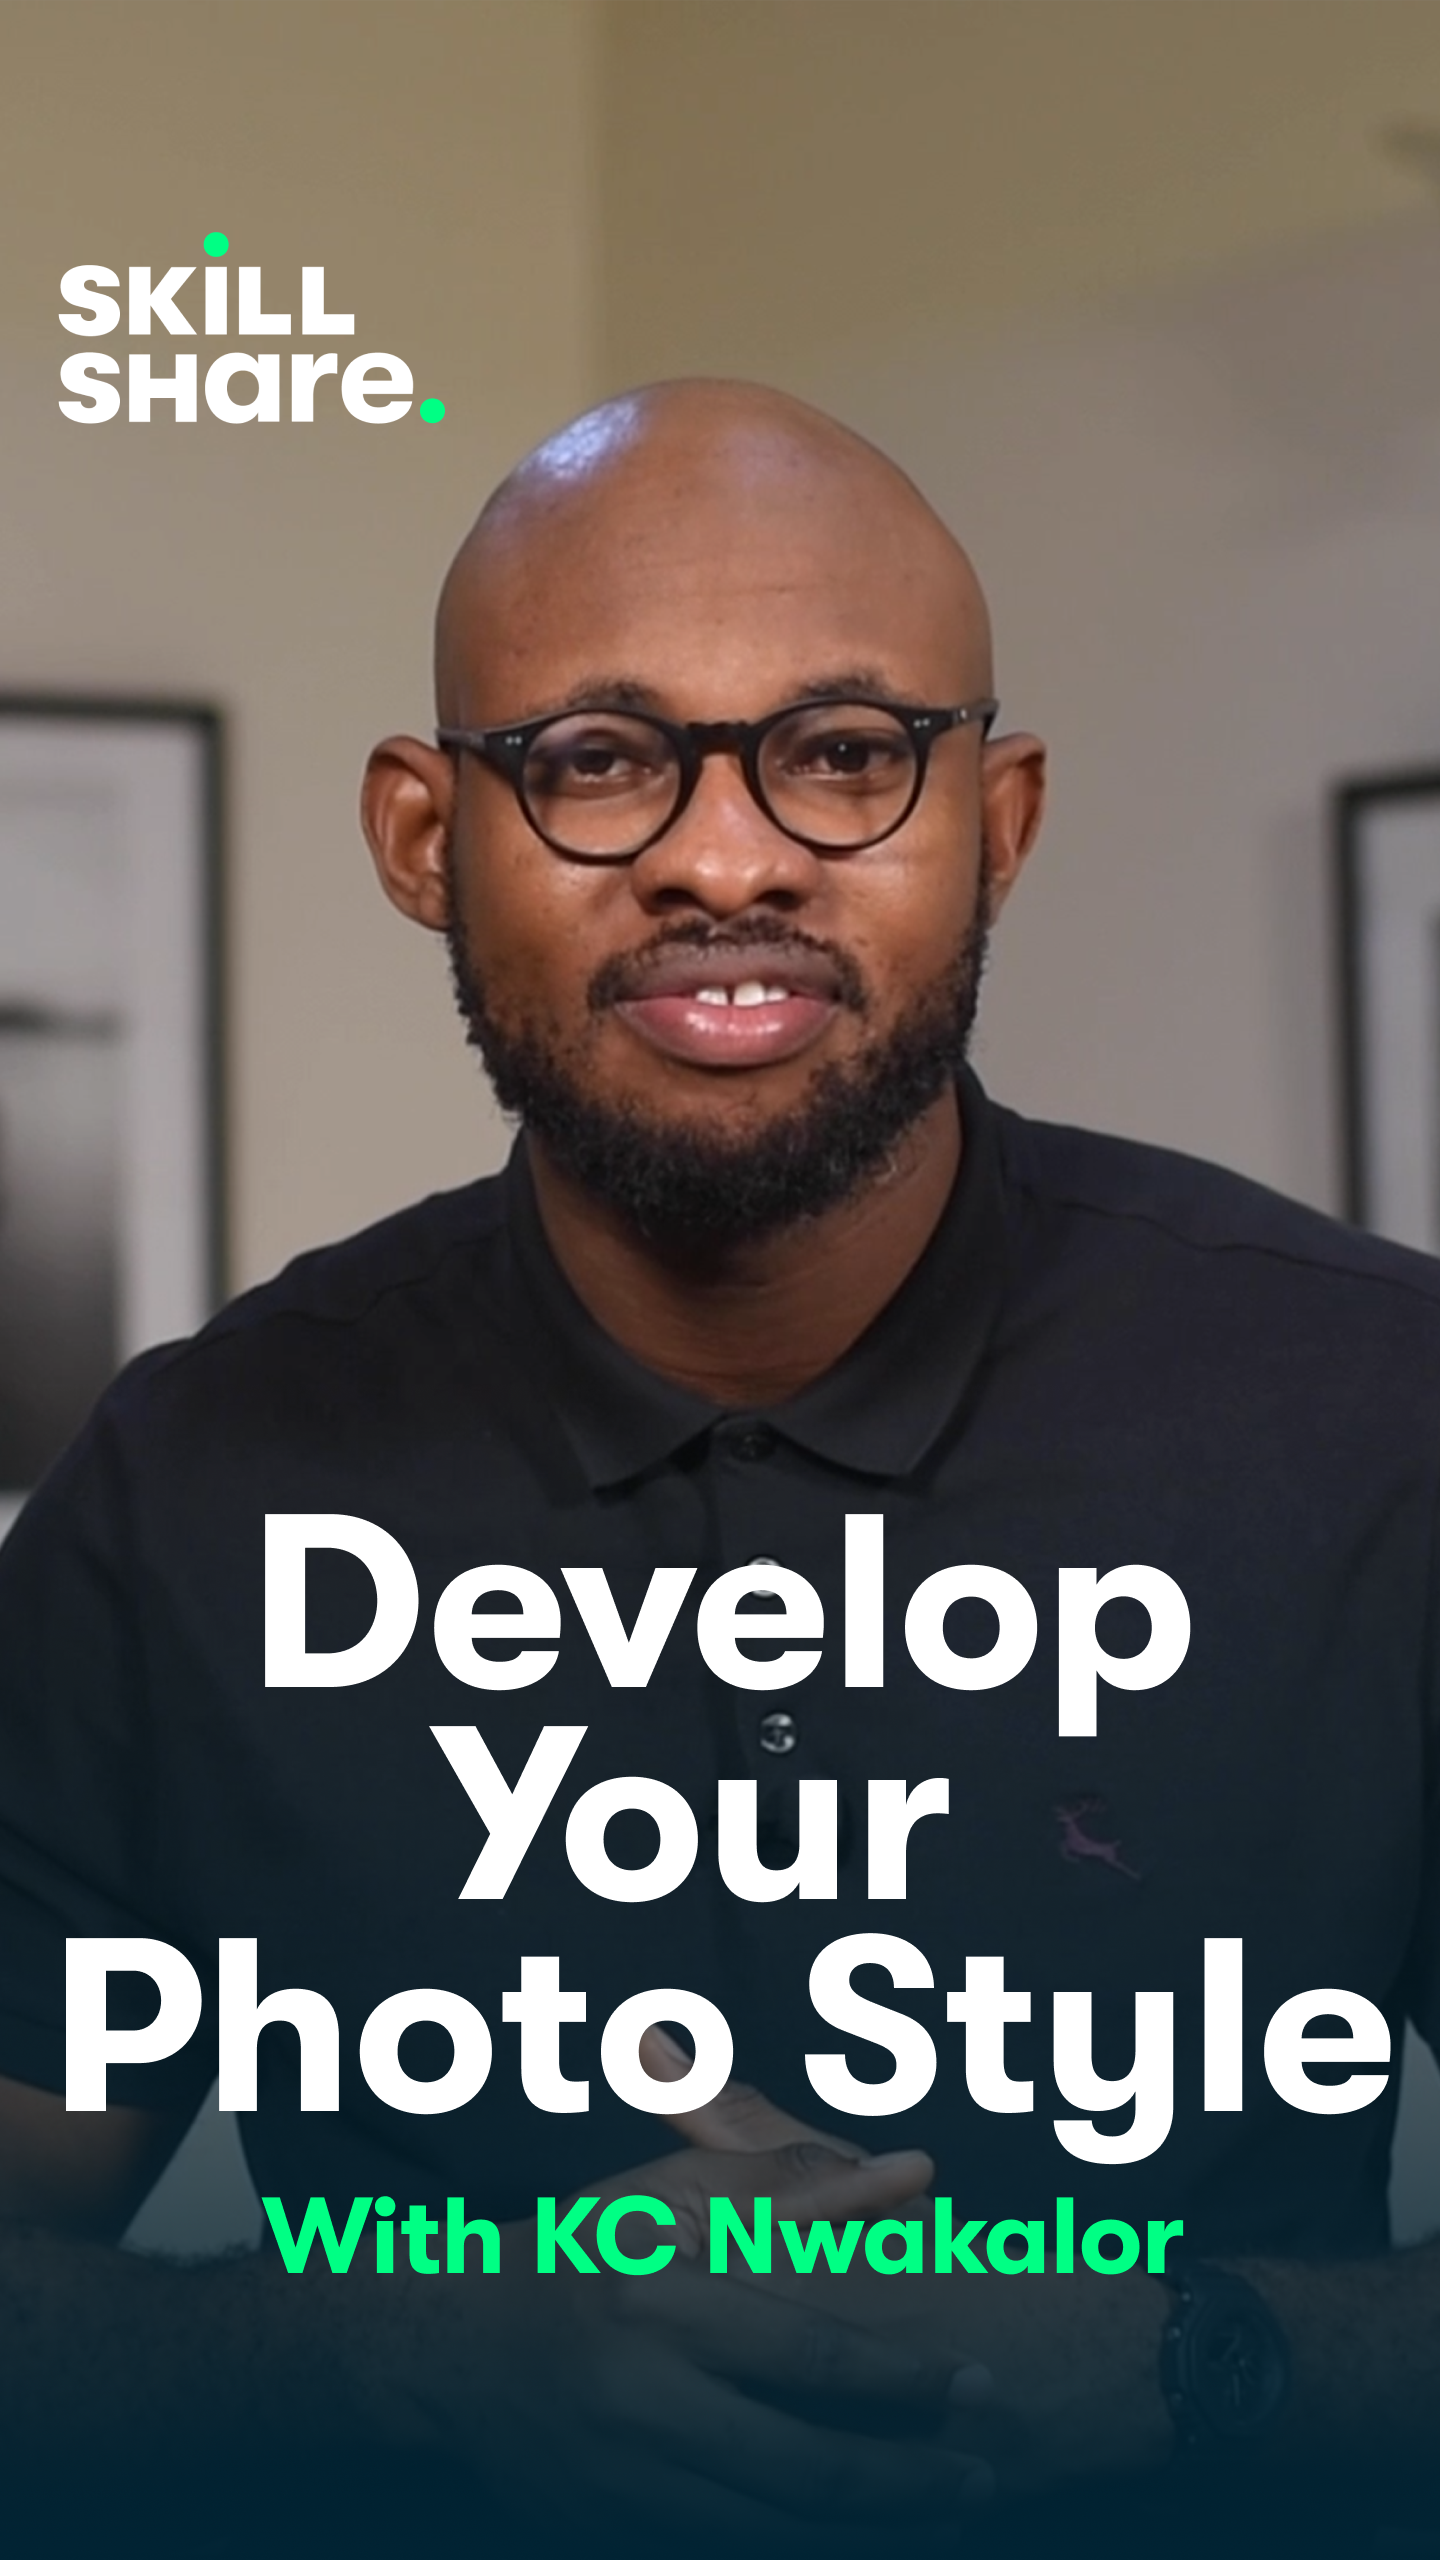 Skillshare: Develop Your Photo Style